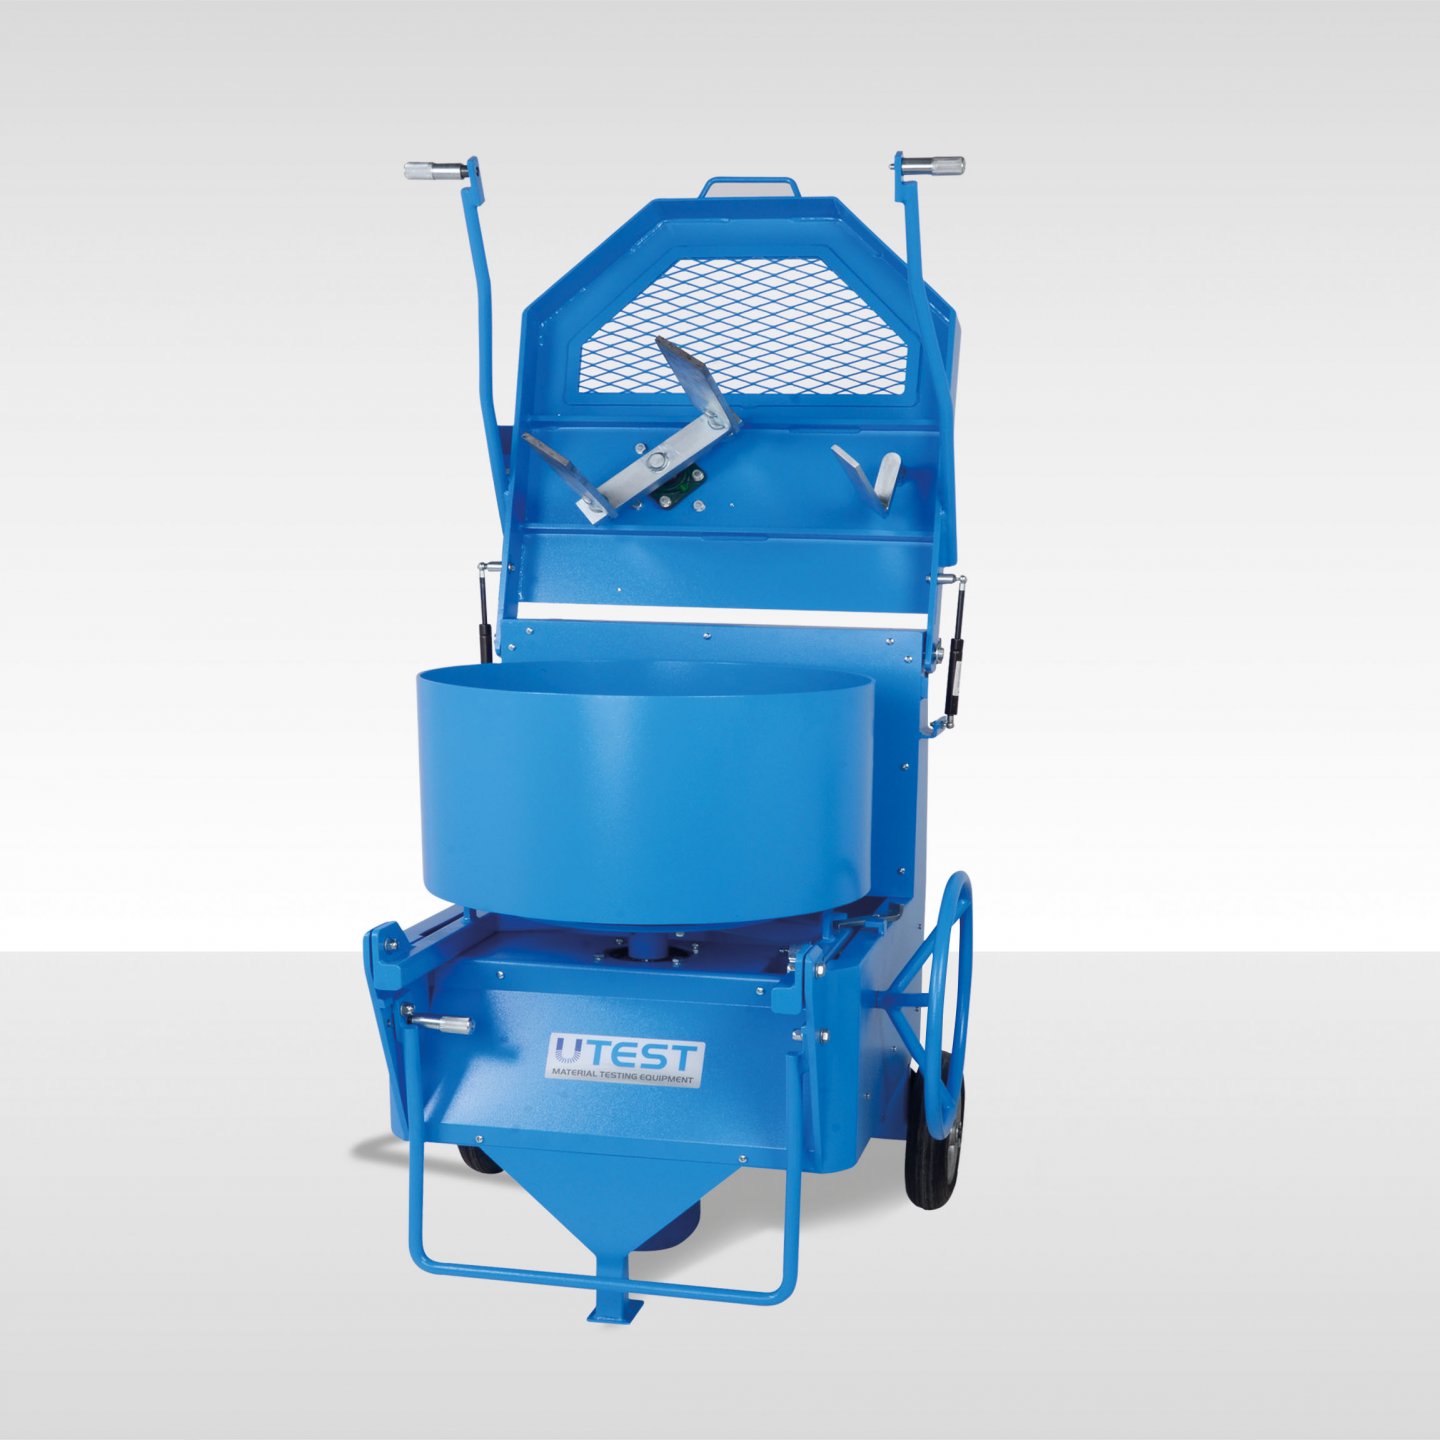 Concrete Mixer Pan Type - Mixing Concrete in The Laboratory - Utest  Material Testing Equipment